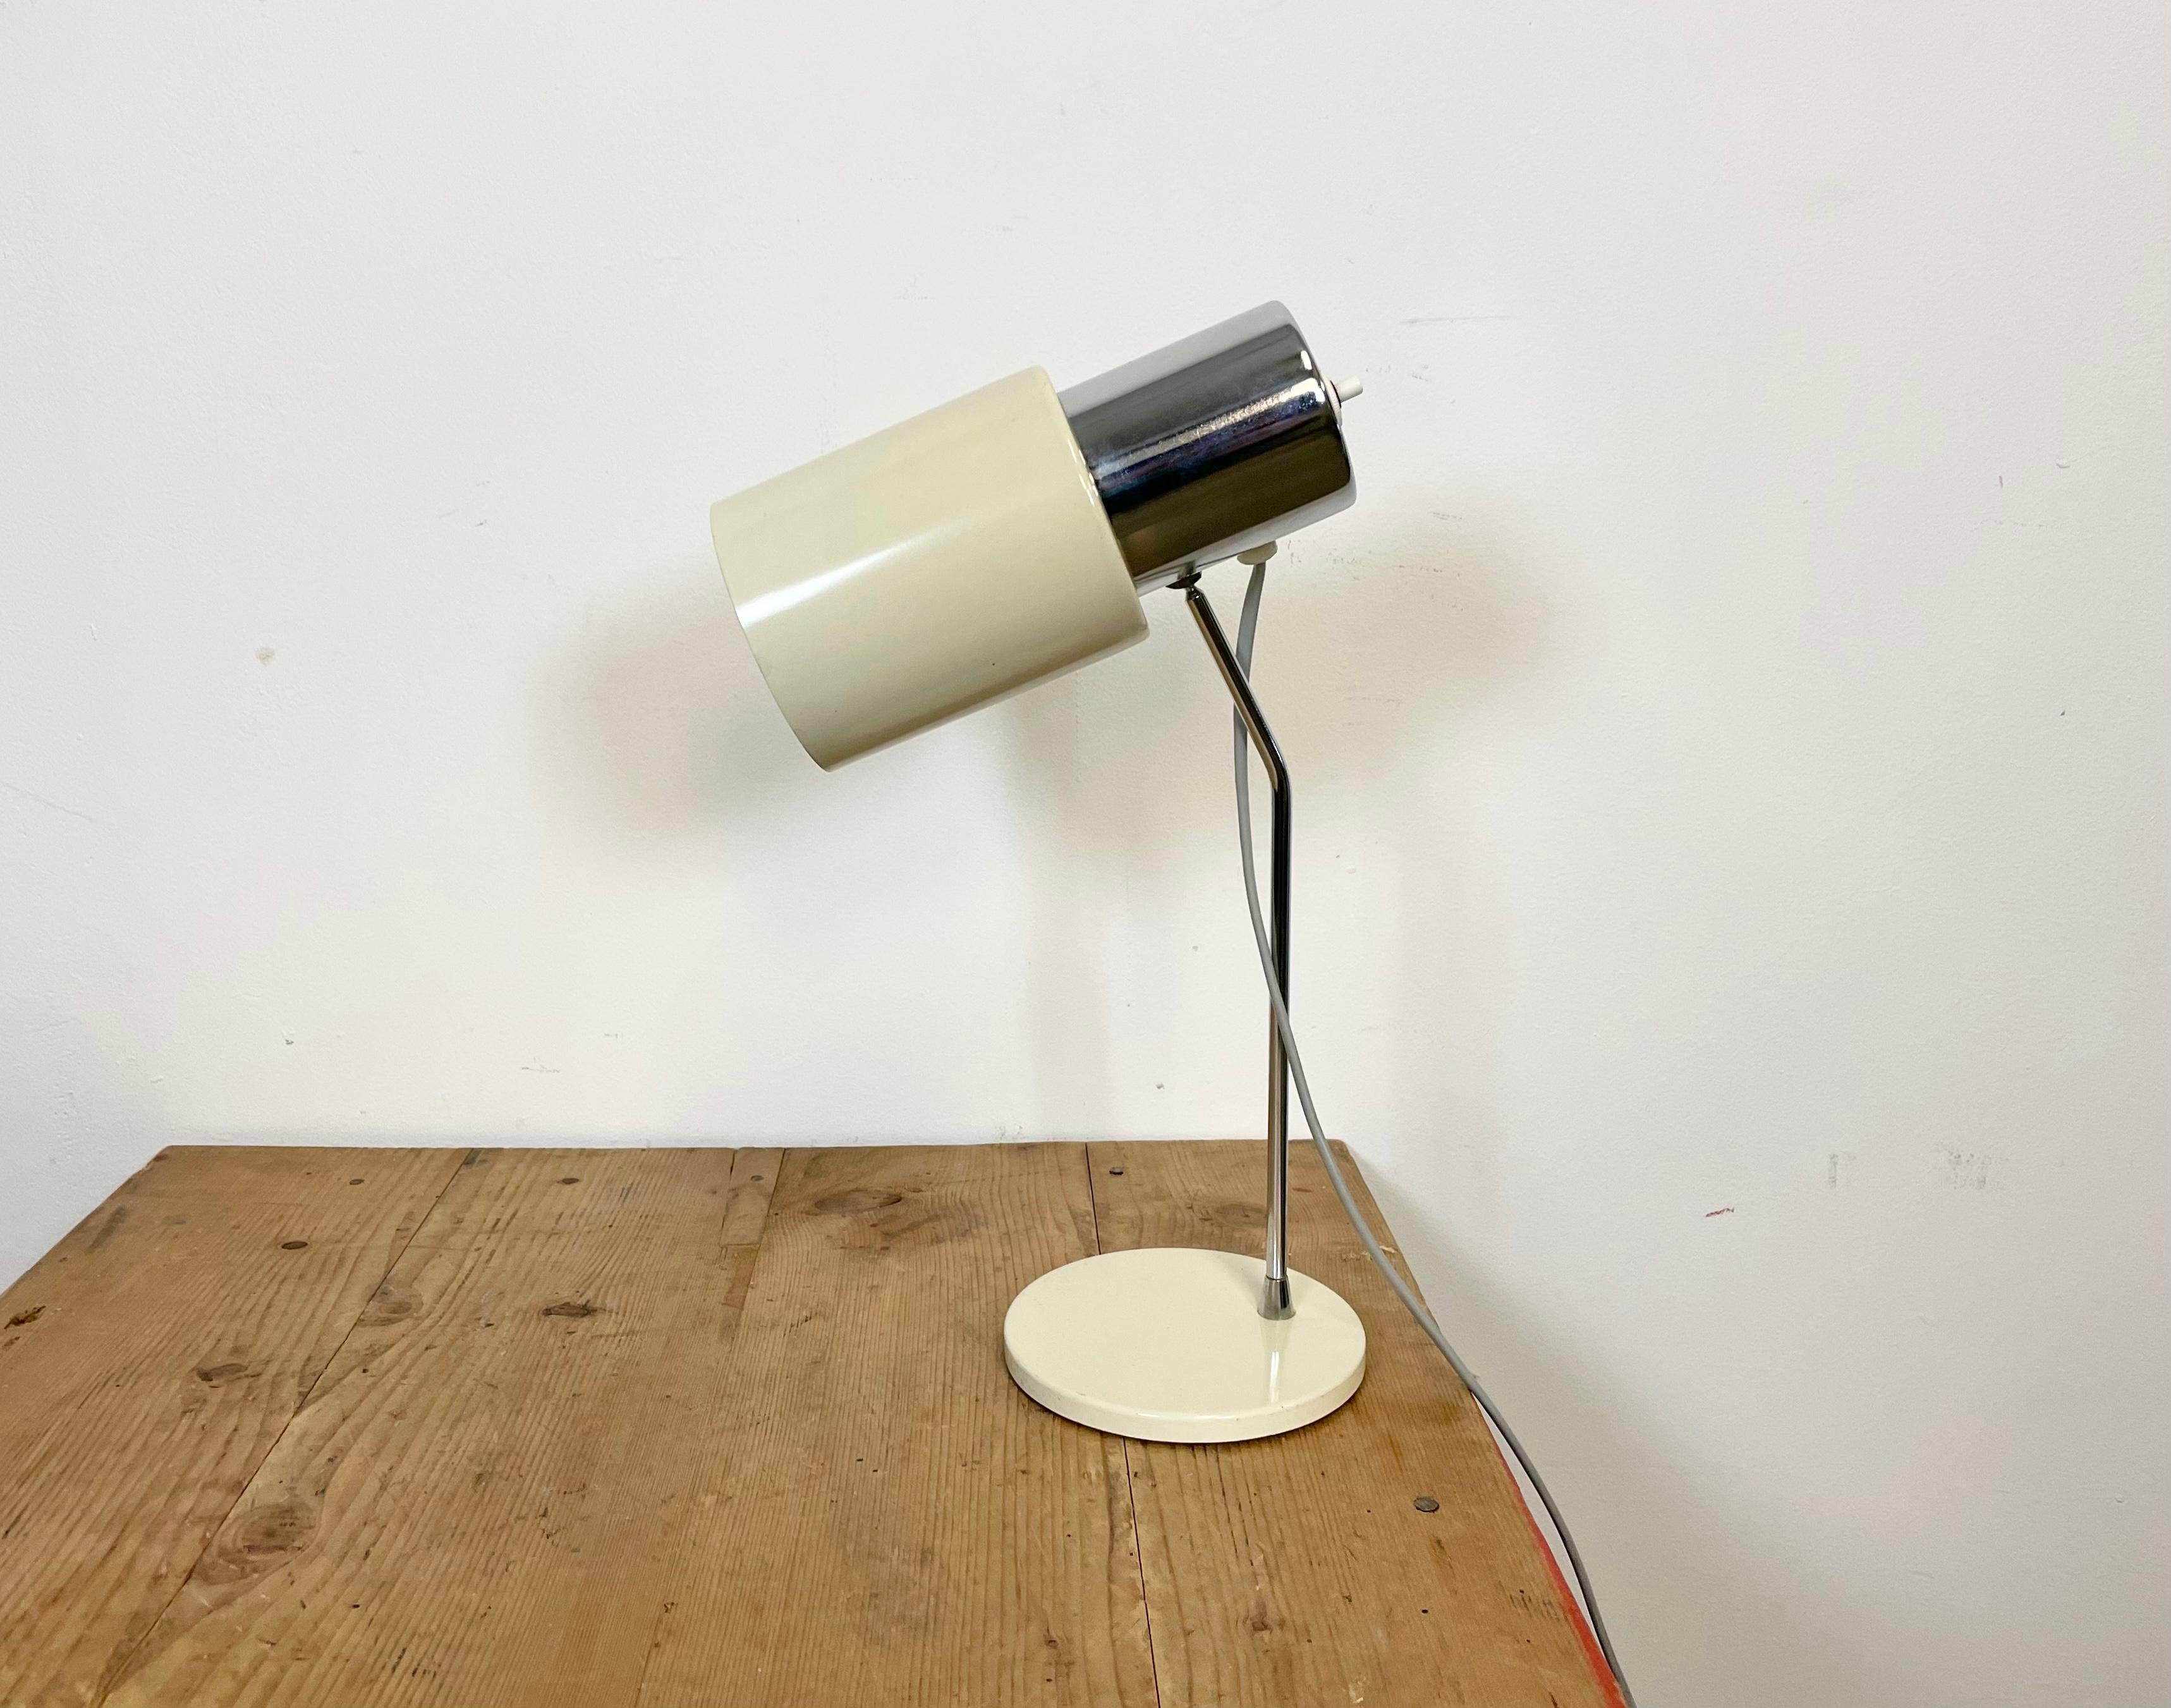 This table lamp, Napako model 1636, was designed by Josef Hurka and produced in former Czechoslovakia by Napako during the 1970s. Fully functional. Good vintage condition. The socket requires E 27 lightbulbs.